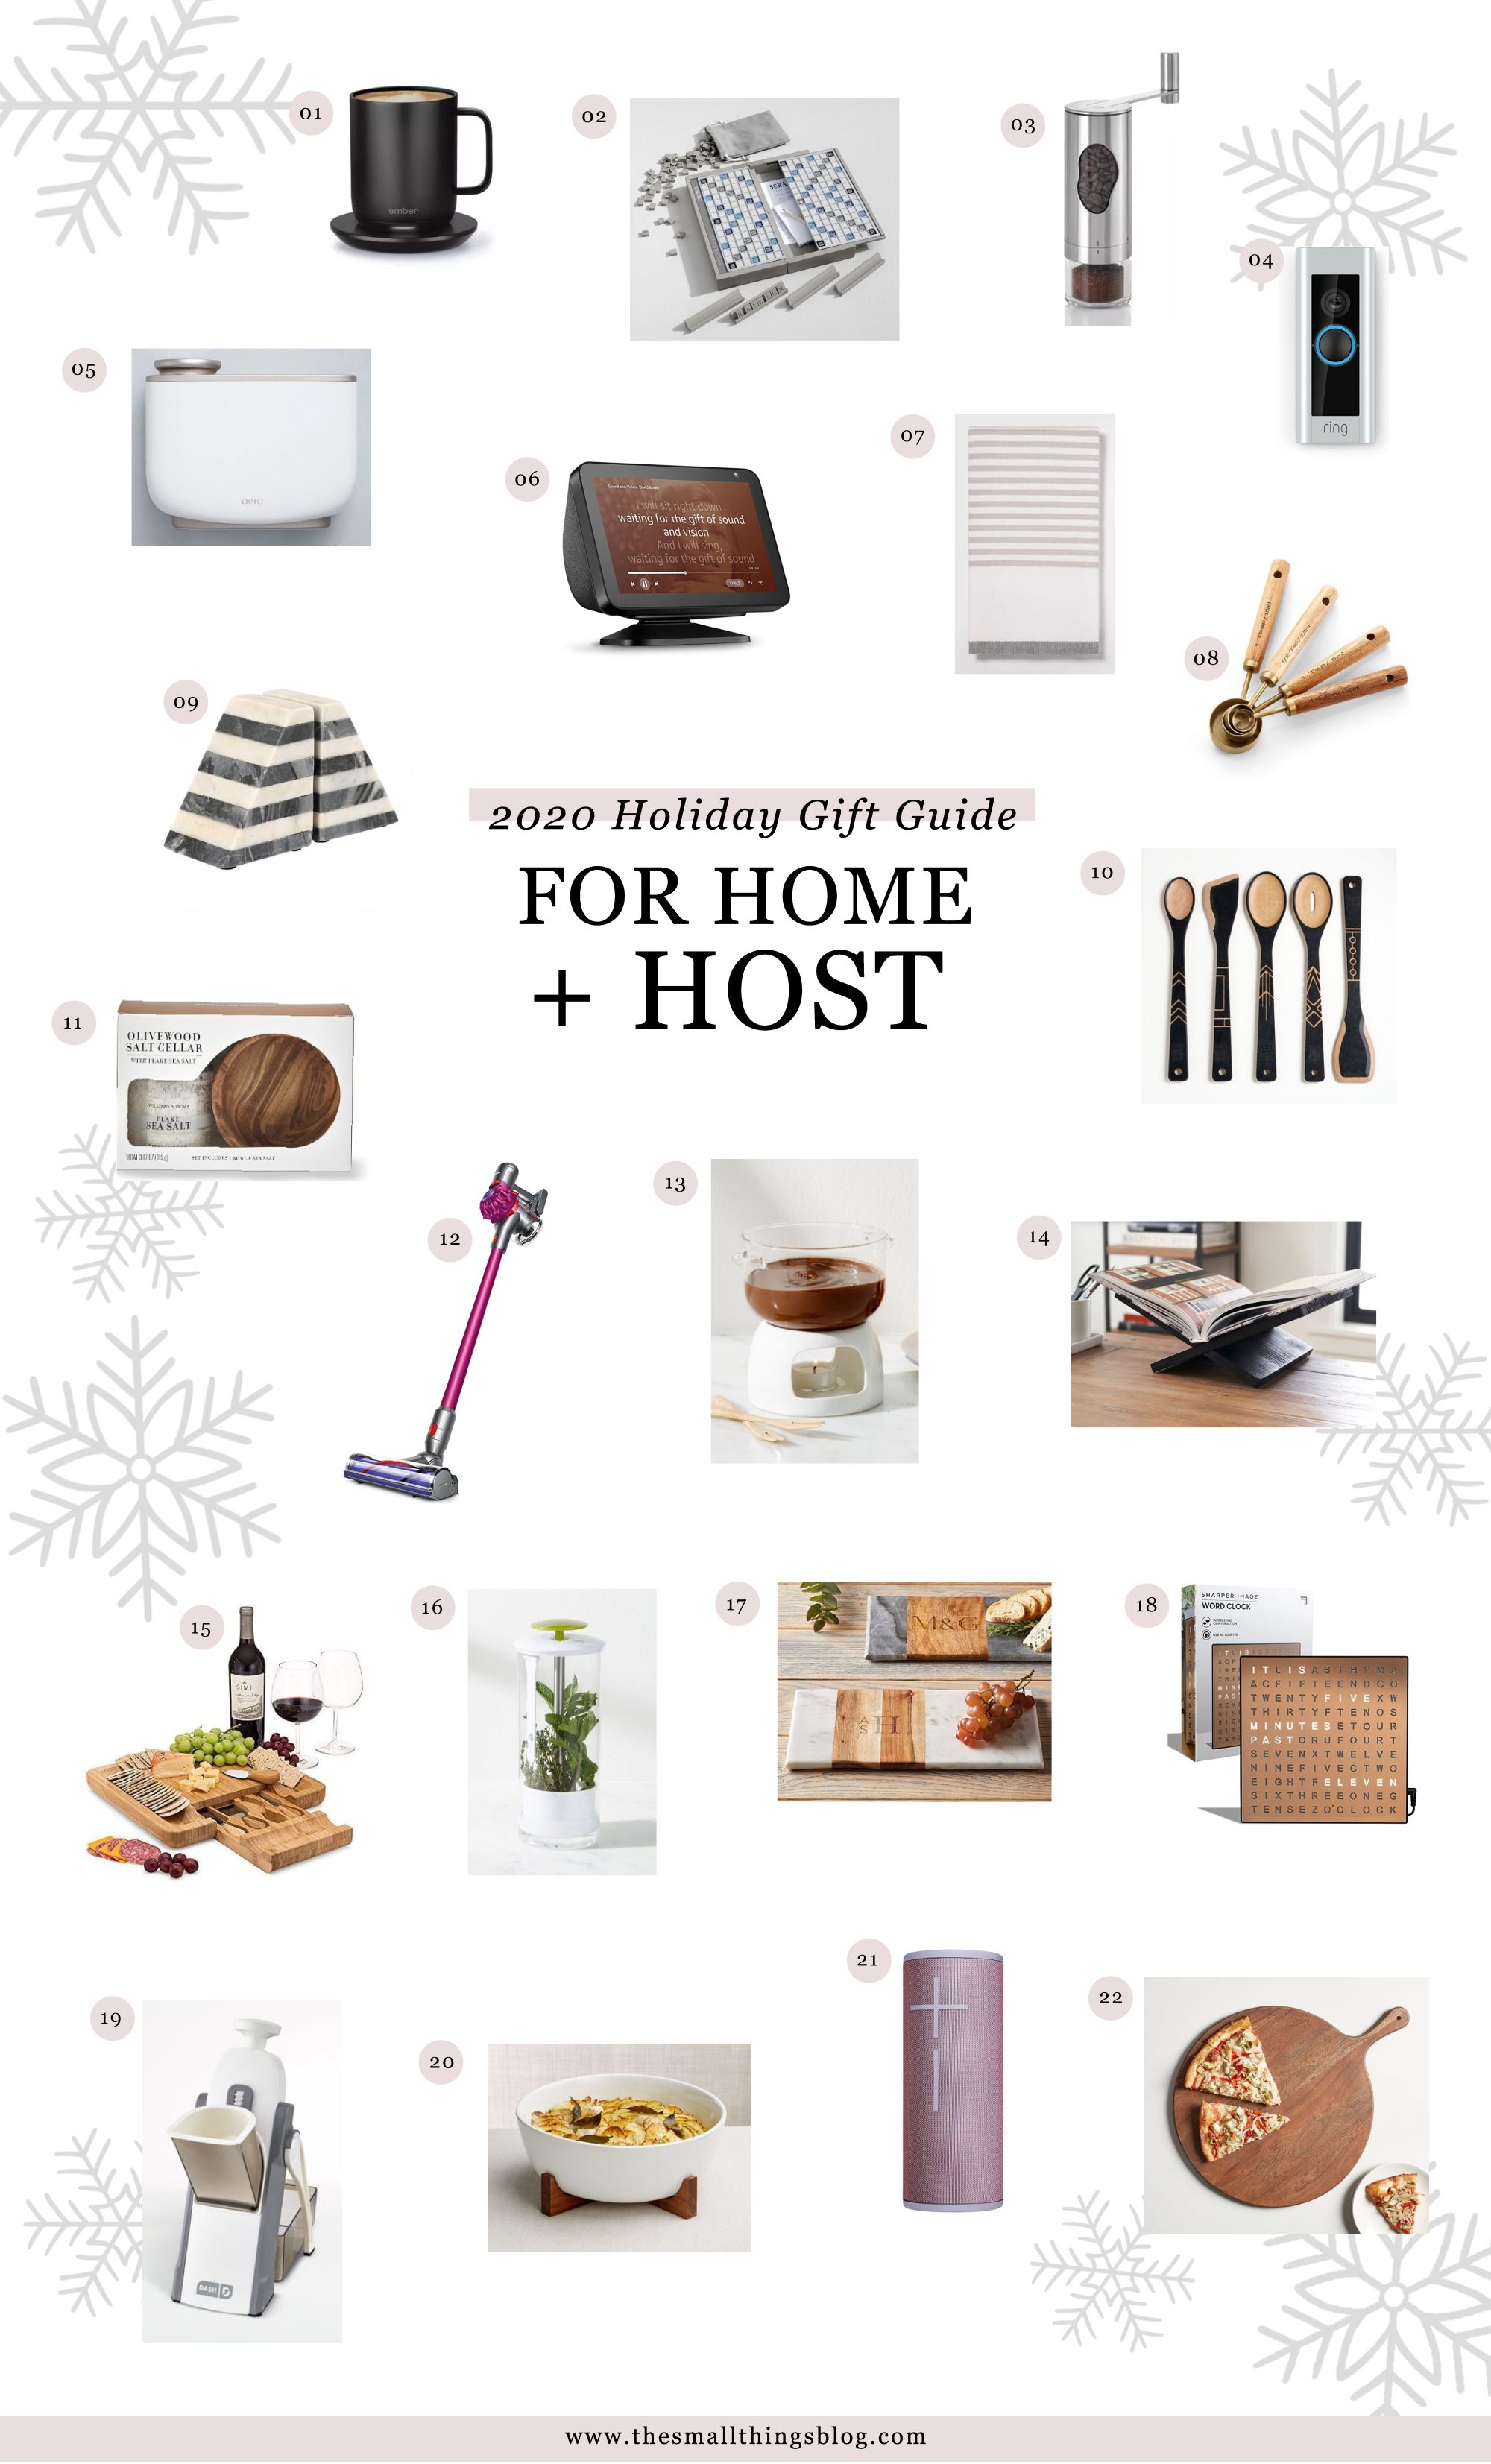 Holiday Gift Guide for Home + Host!